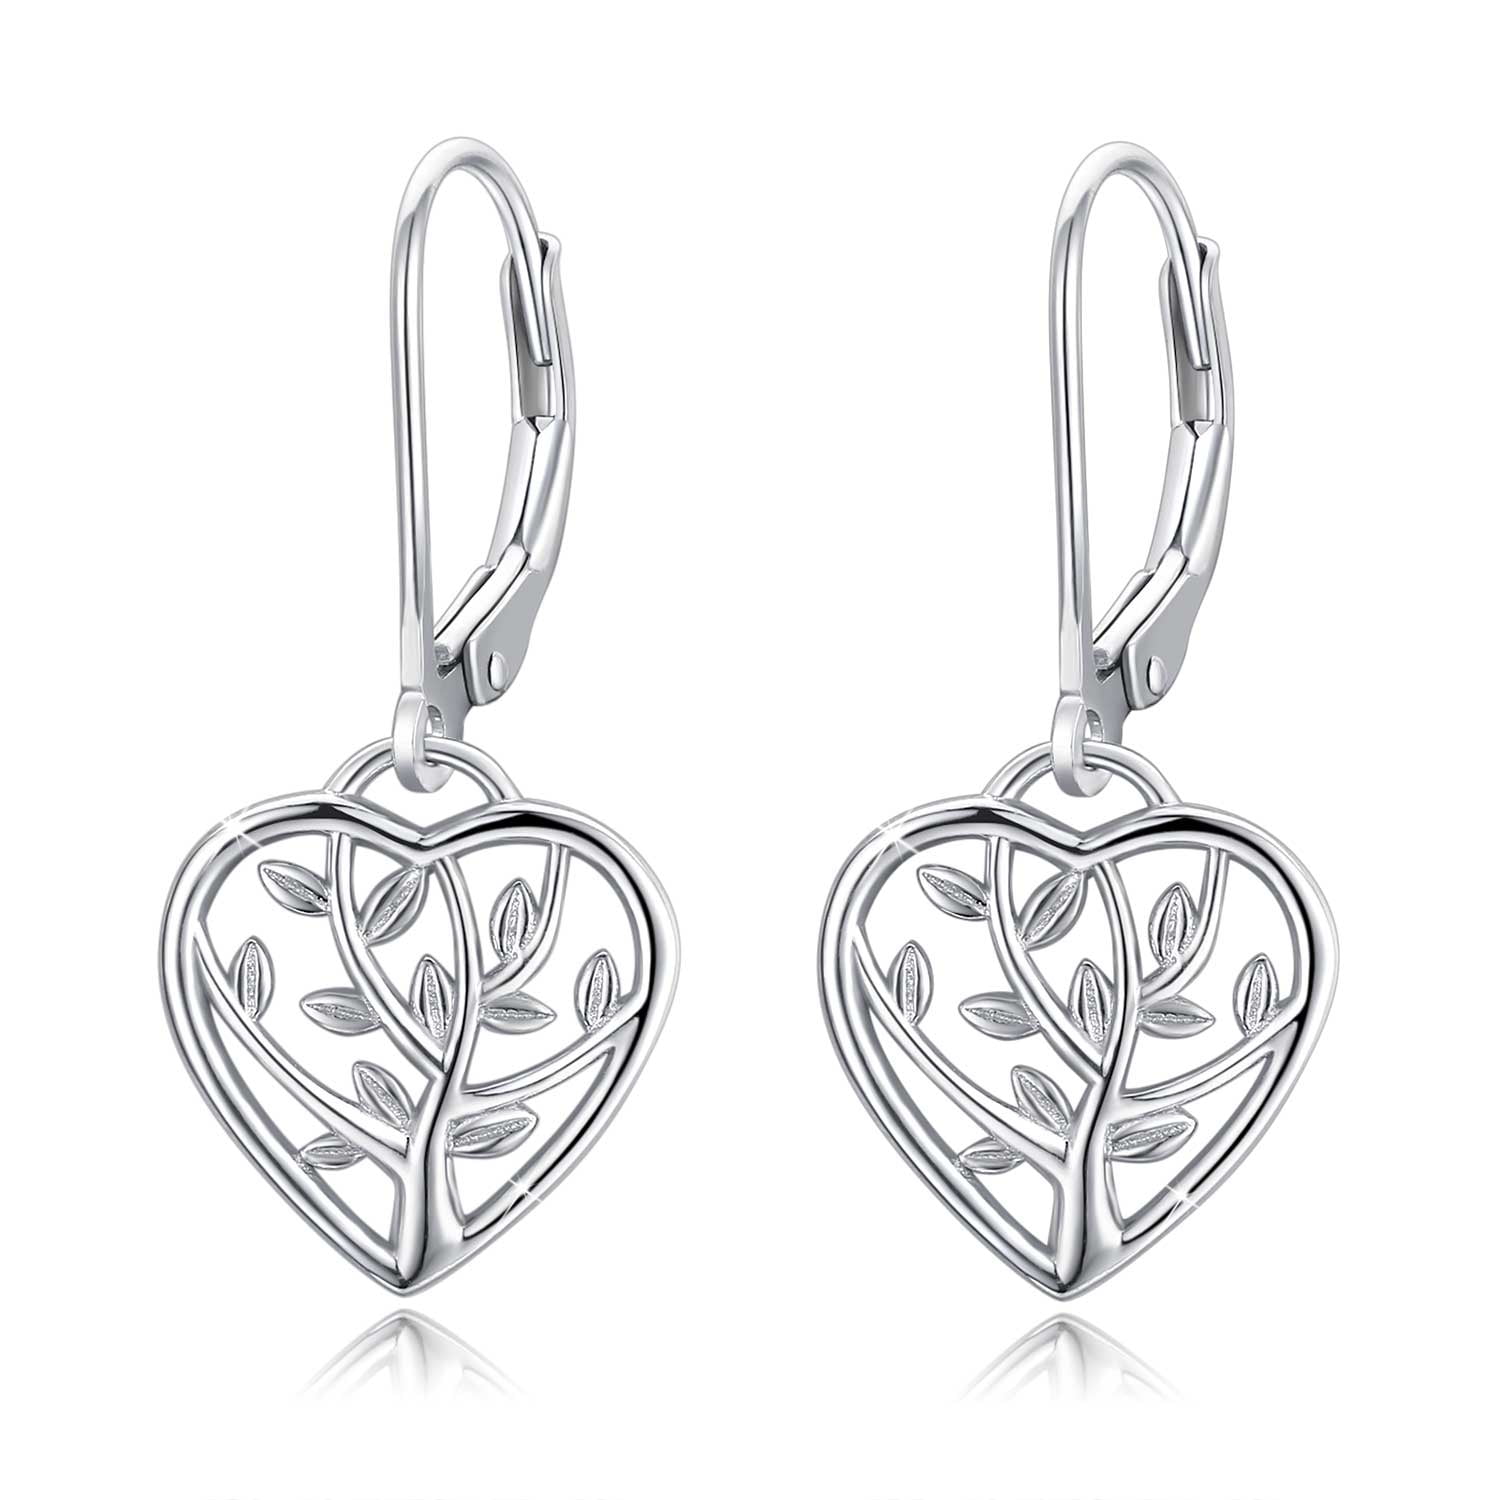 CLIP ON Big Heart Earrings Dangle with Brushed Silver Tone Finish Drop